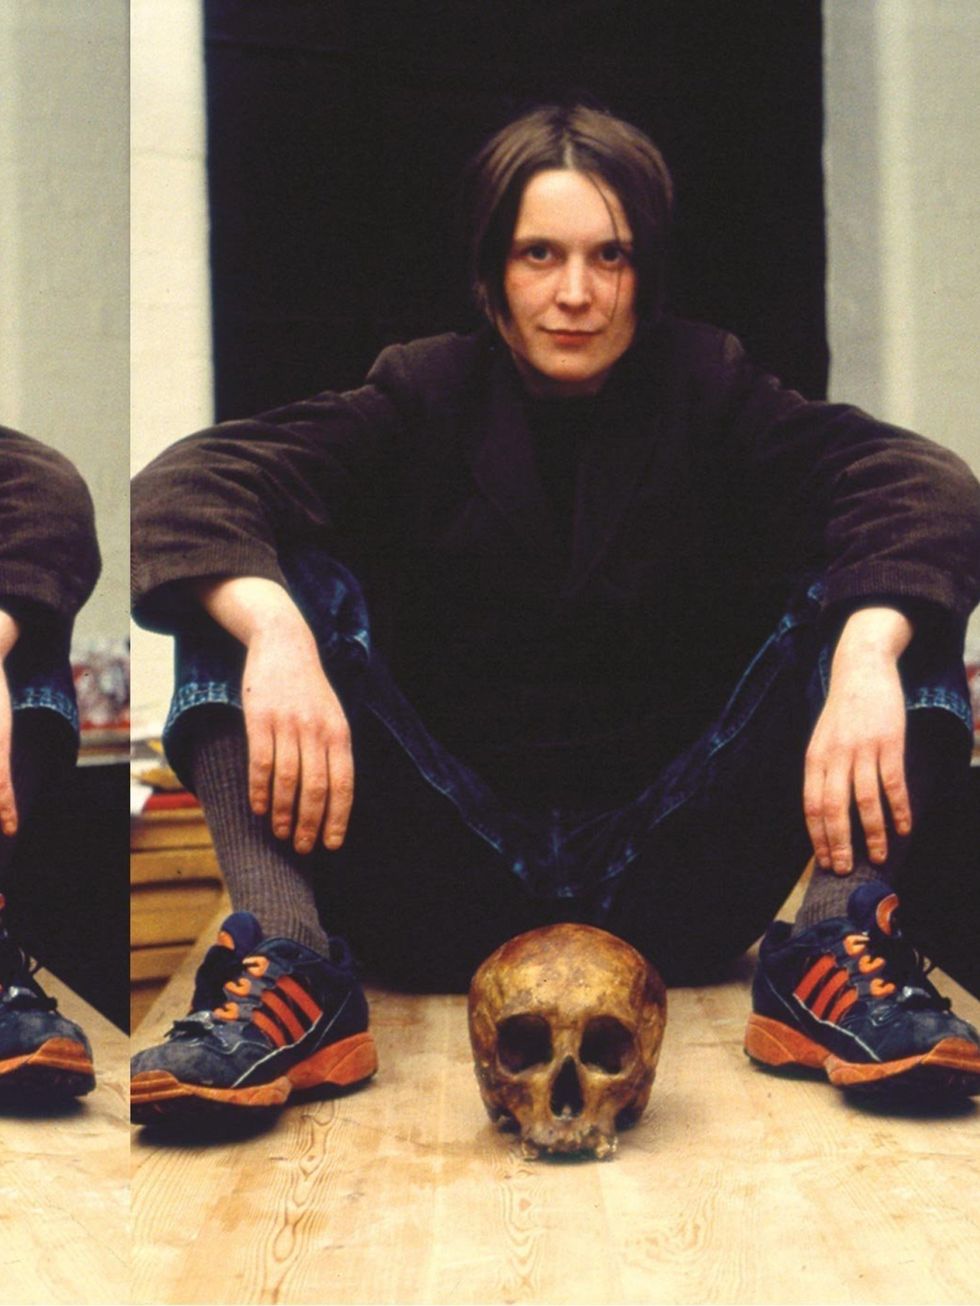 <p><strong>SITUATION Absolute Man Beach Rubble</strong></p><p>Two decades of work make up this brilliant solo exhibition celebrating Young British Artist Sarah Lucas. Her suggestive installations and sculptural creations focus on the body, challenging pre